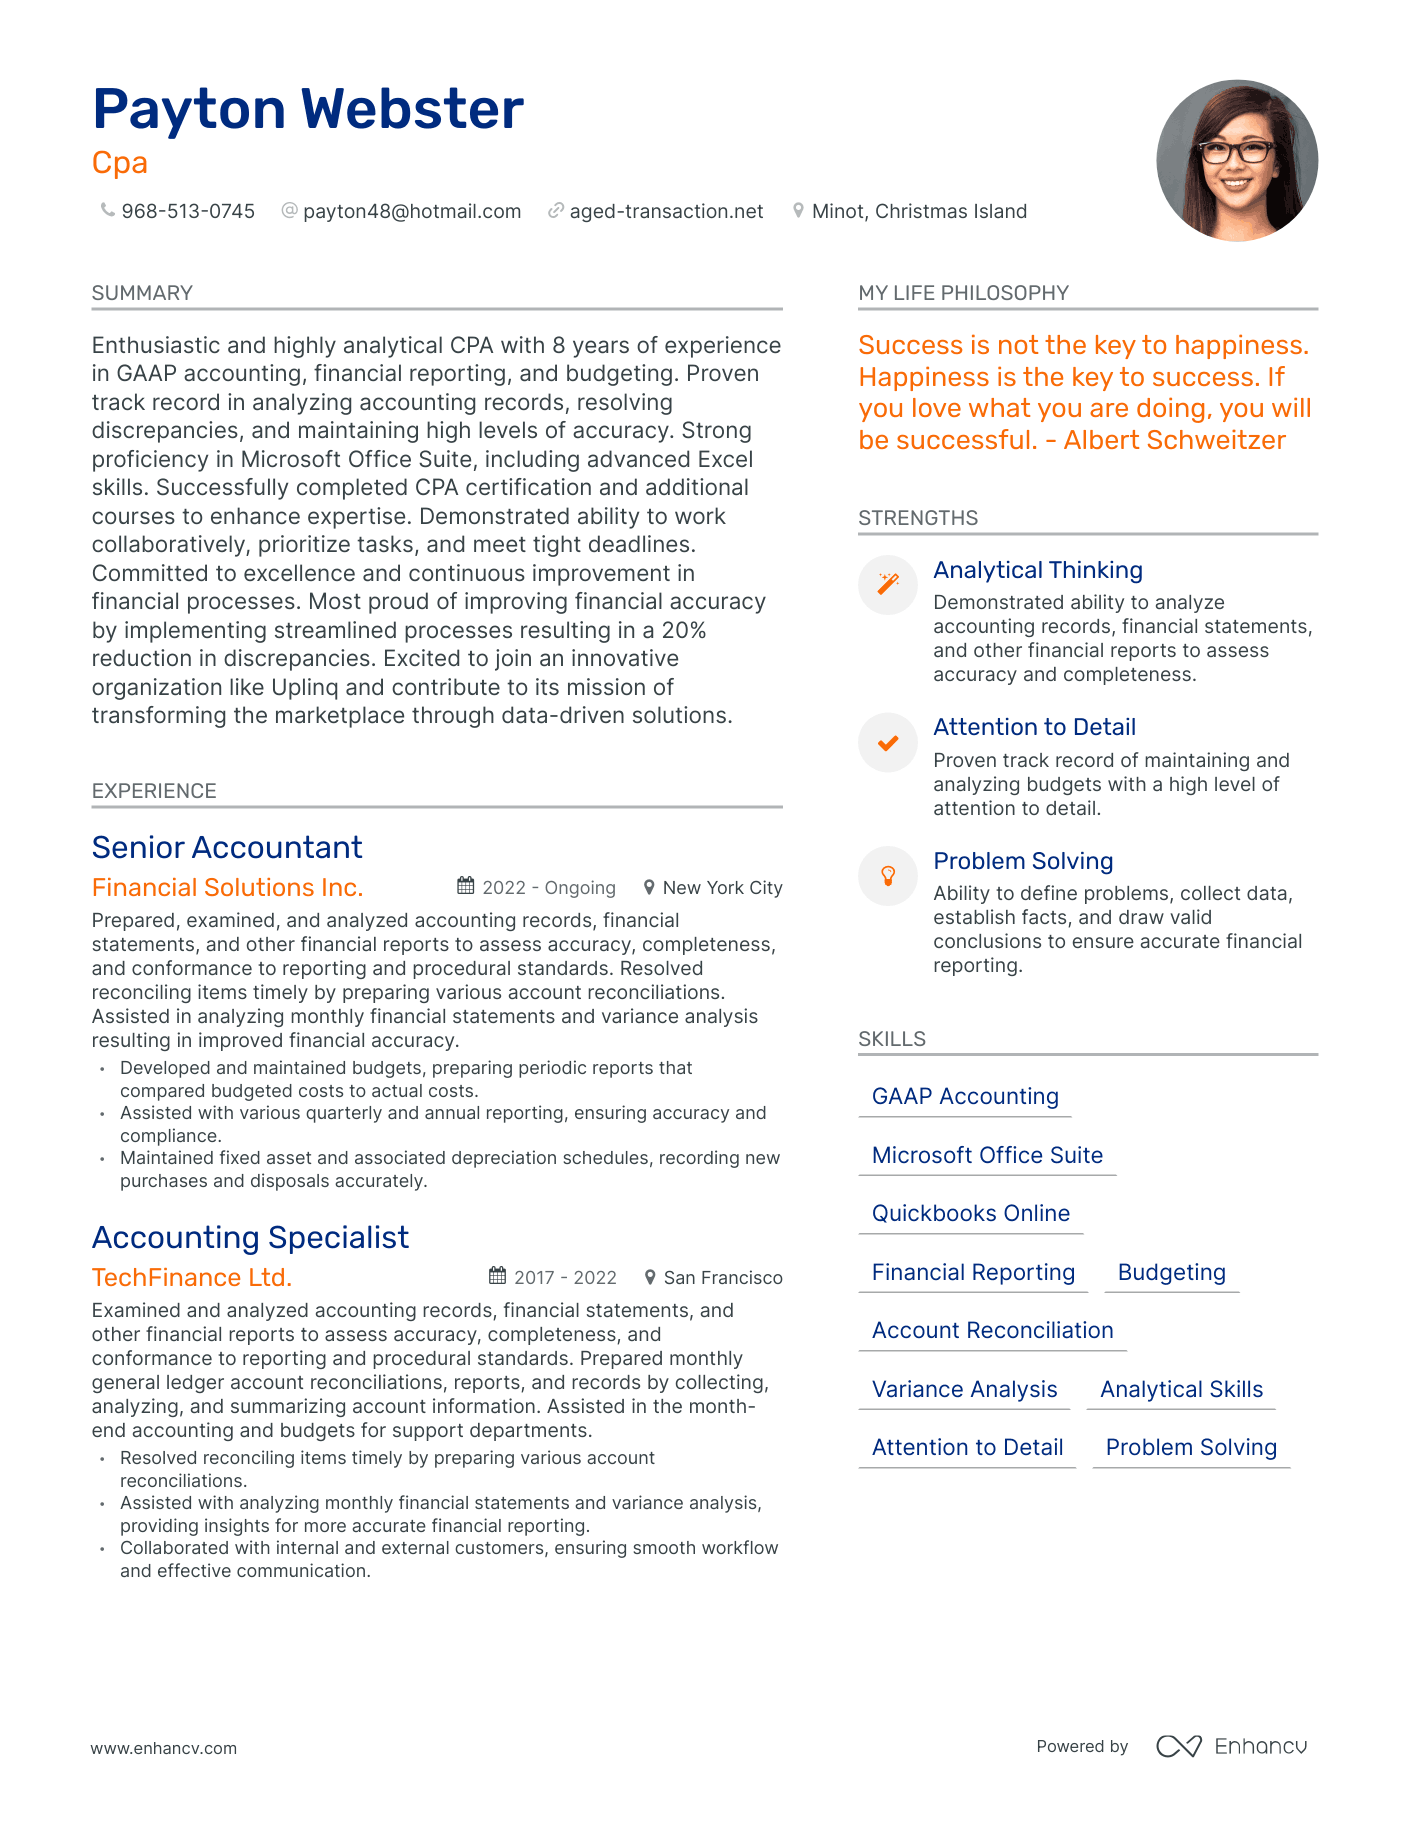 Cpa resume example